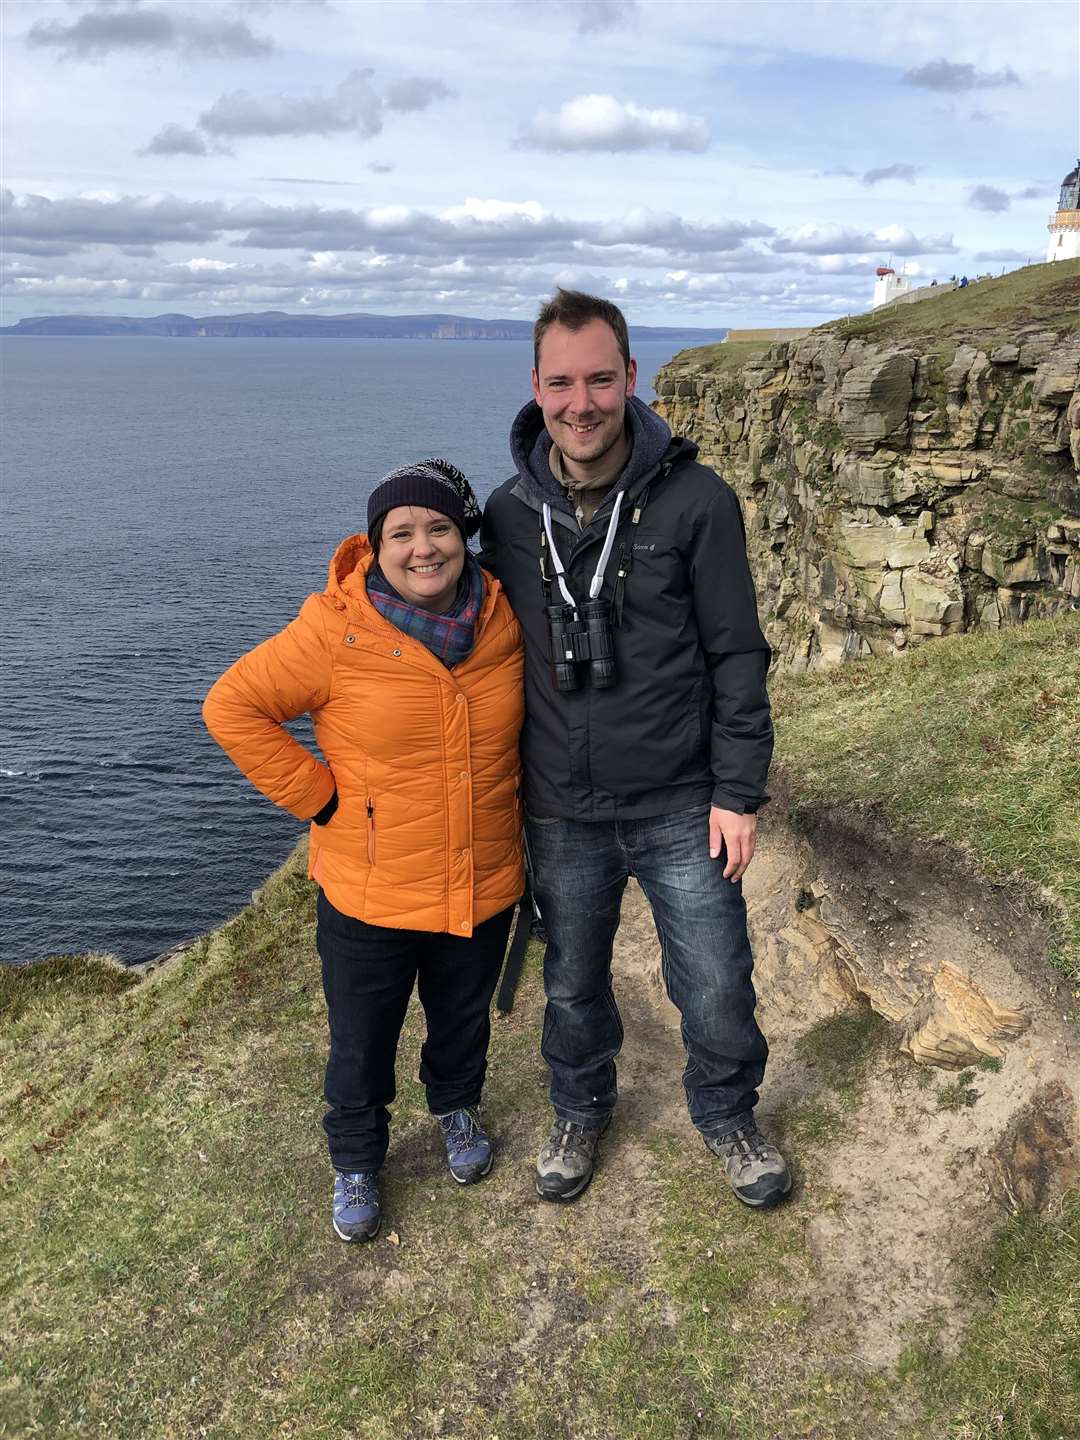 Secret Scotland presenter Susan Calman travelled to Dunnet Head and met RSPB conservation scientist Rob Hughes. Picture: IWC Media